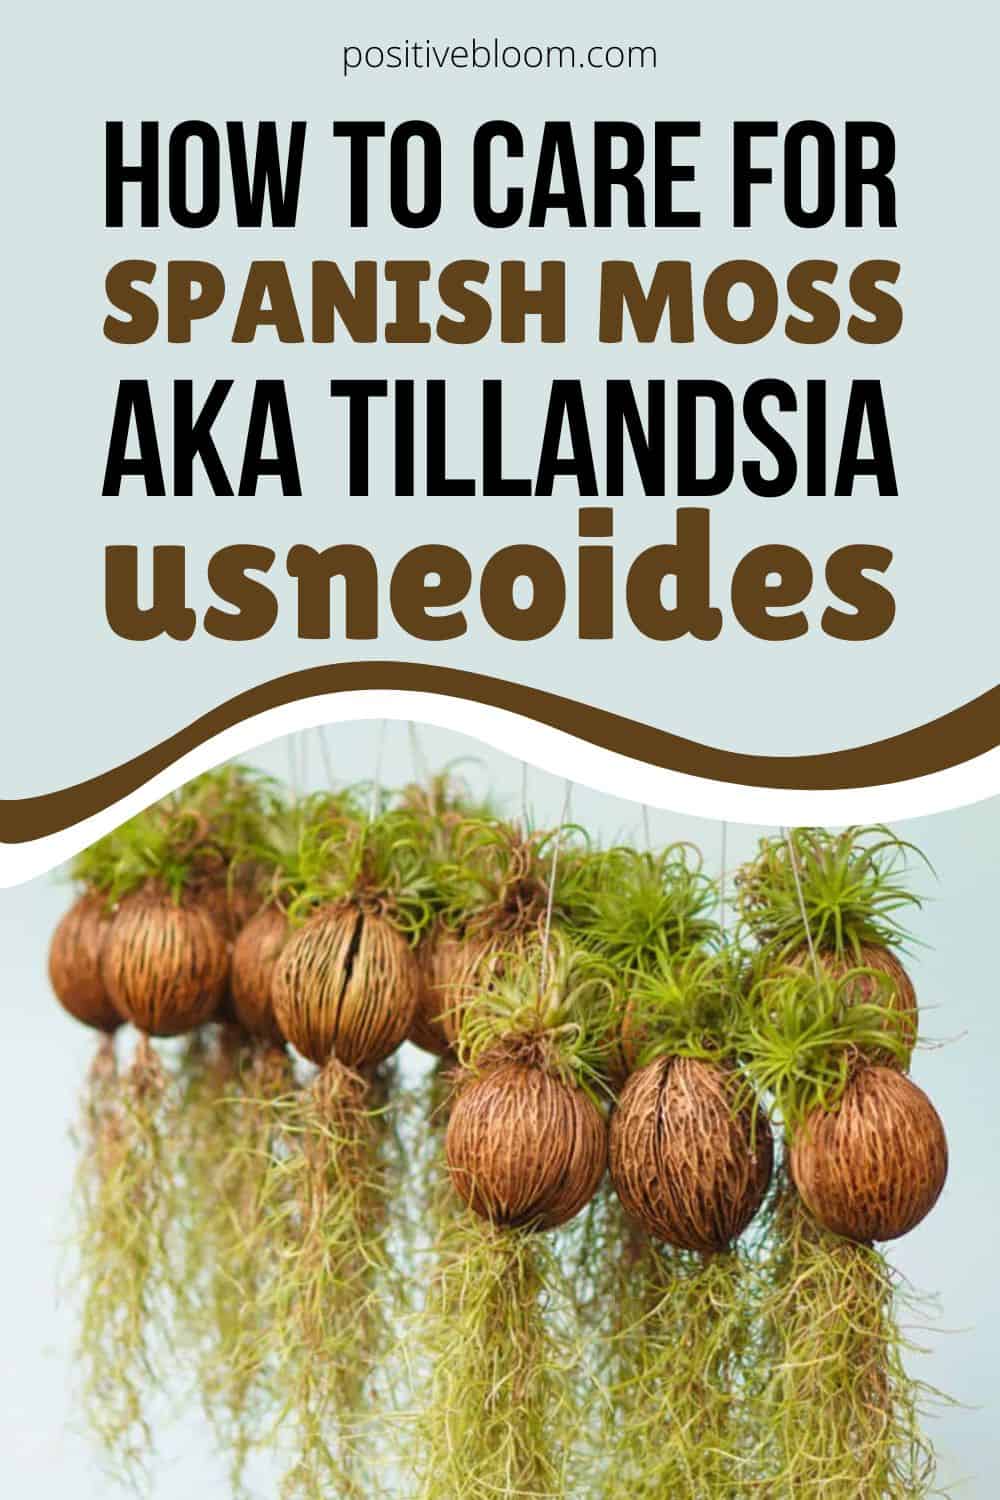 How To Care For Spanish Moss aka Tillandsia Usneoides Pinterest